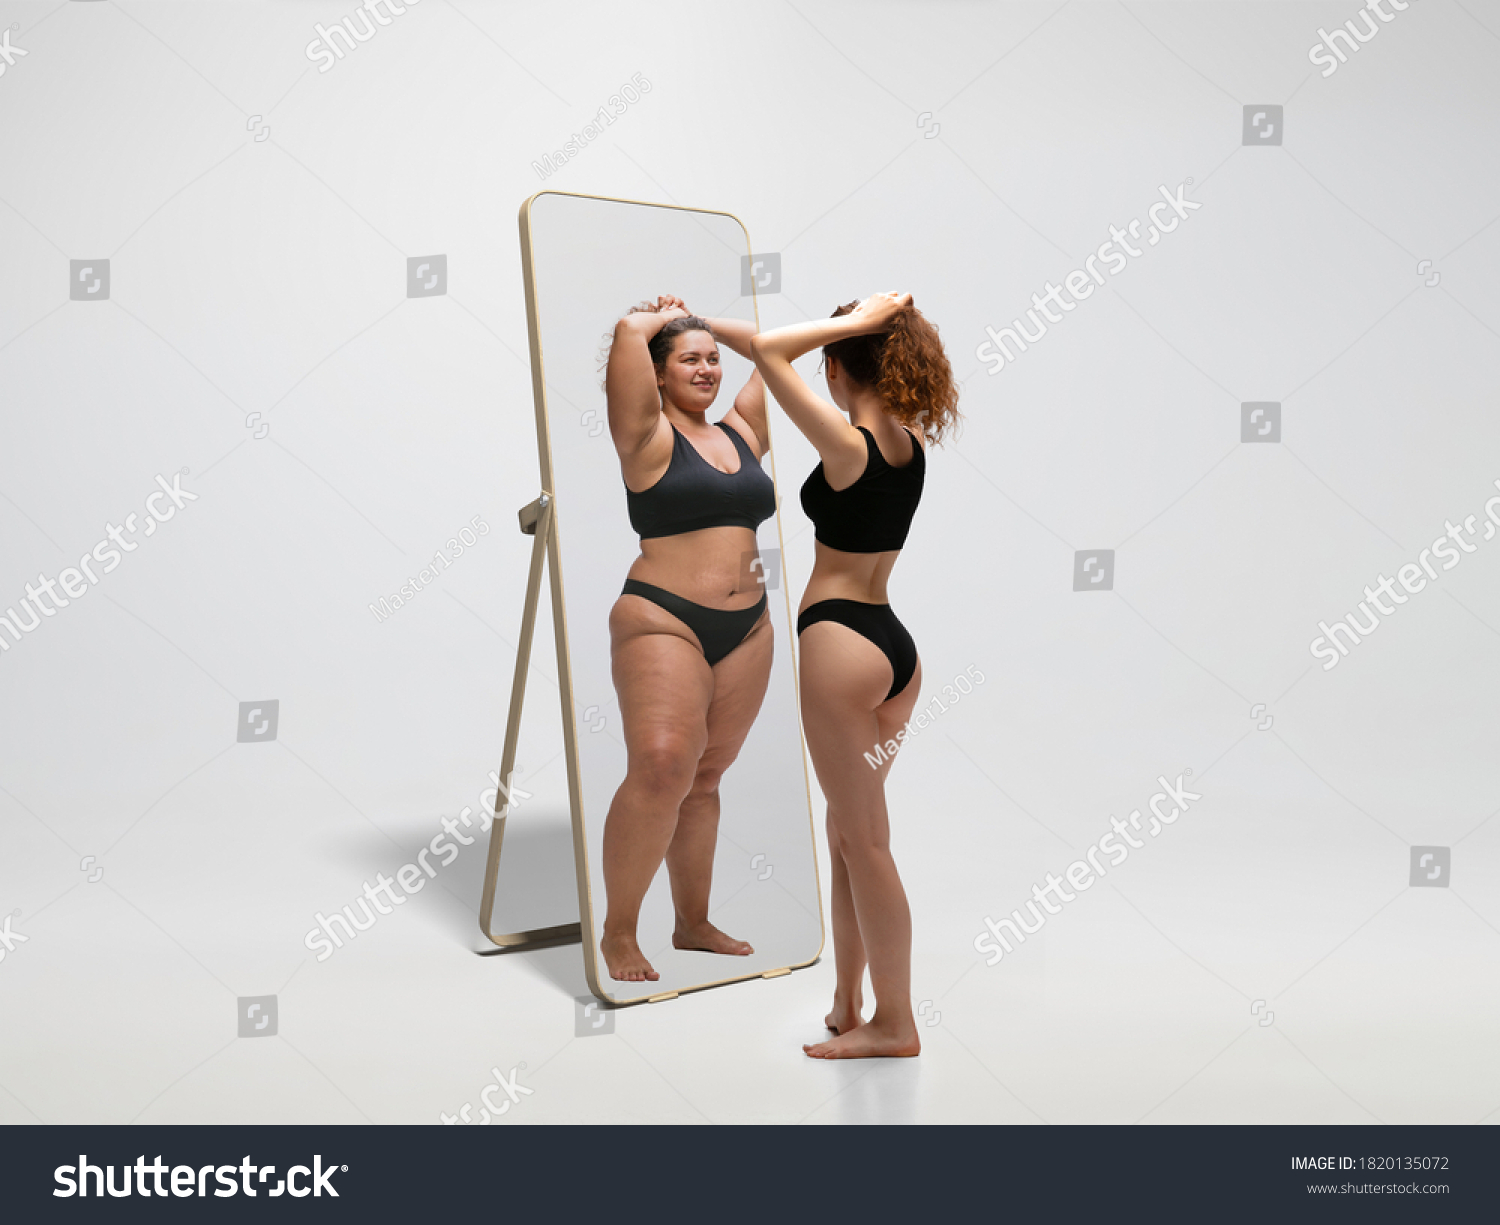 Young fit, slim woman looking at fat girl in mirror's reflection on white background. Thinking she's not enough sportive. Concept of healthy lifestyle, fitness, sport, nutrition and body positive. #1820135072